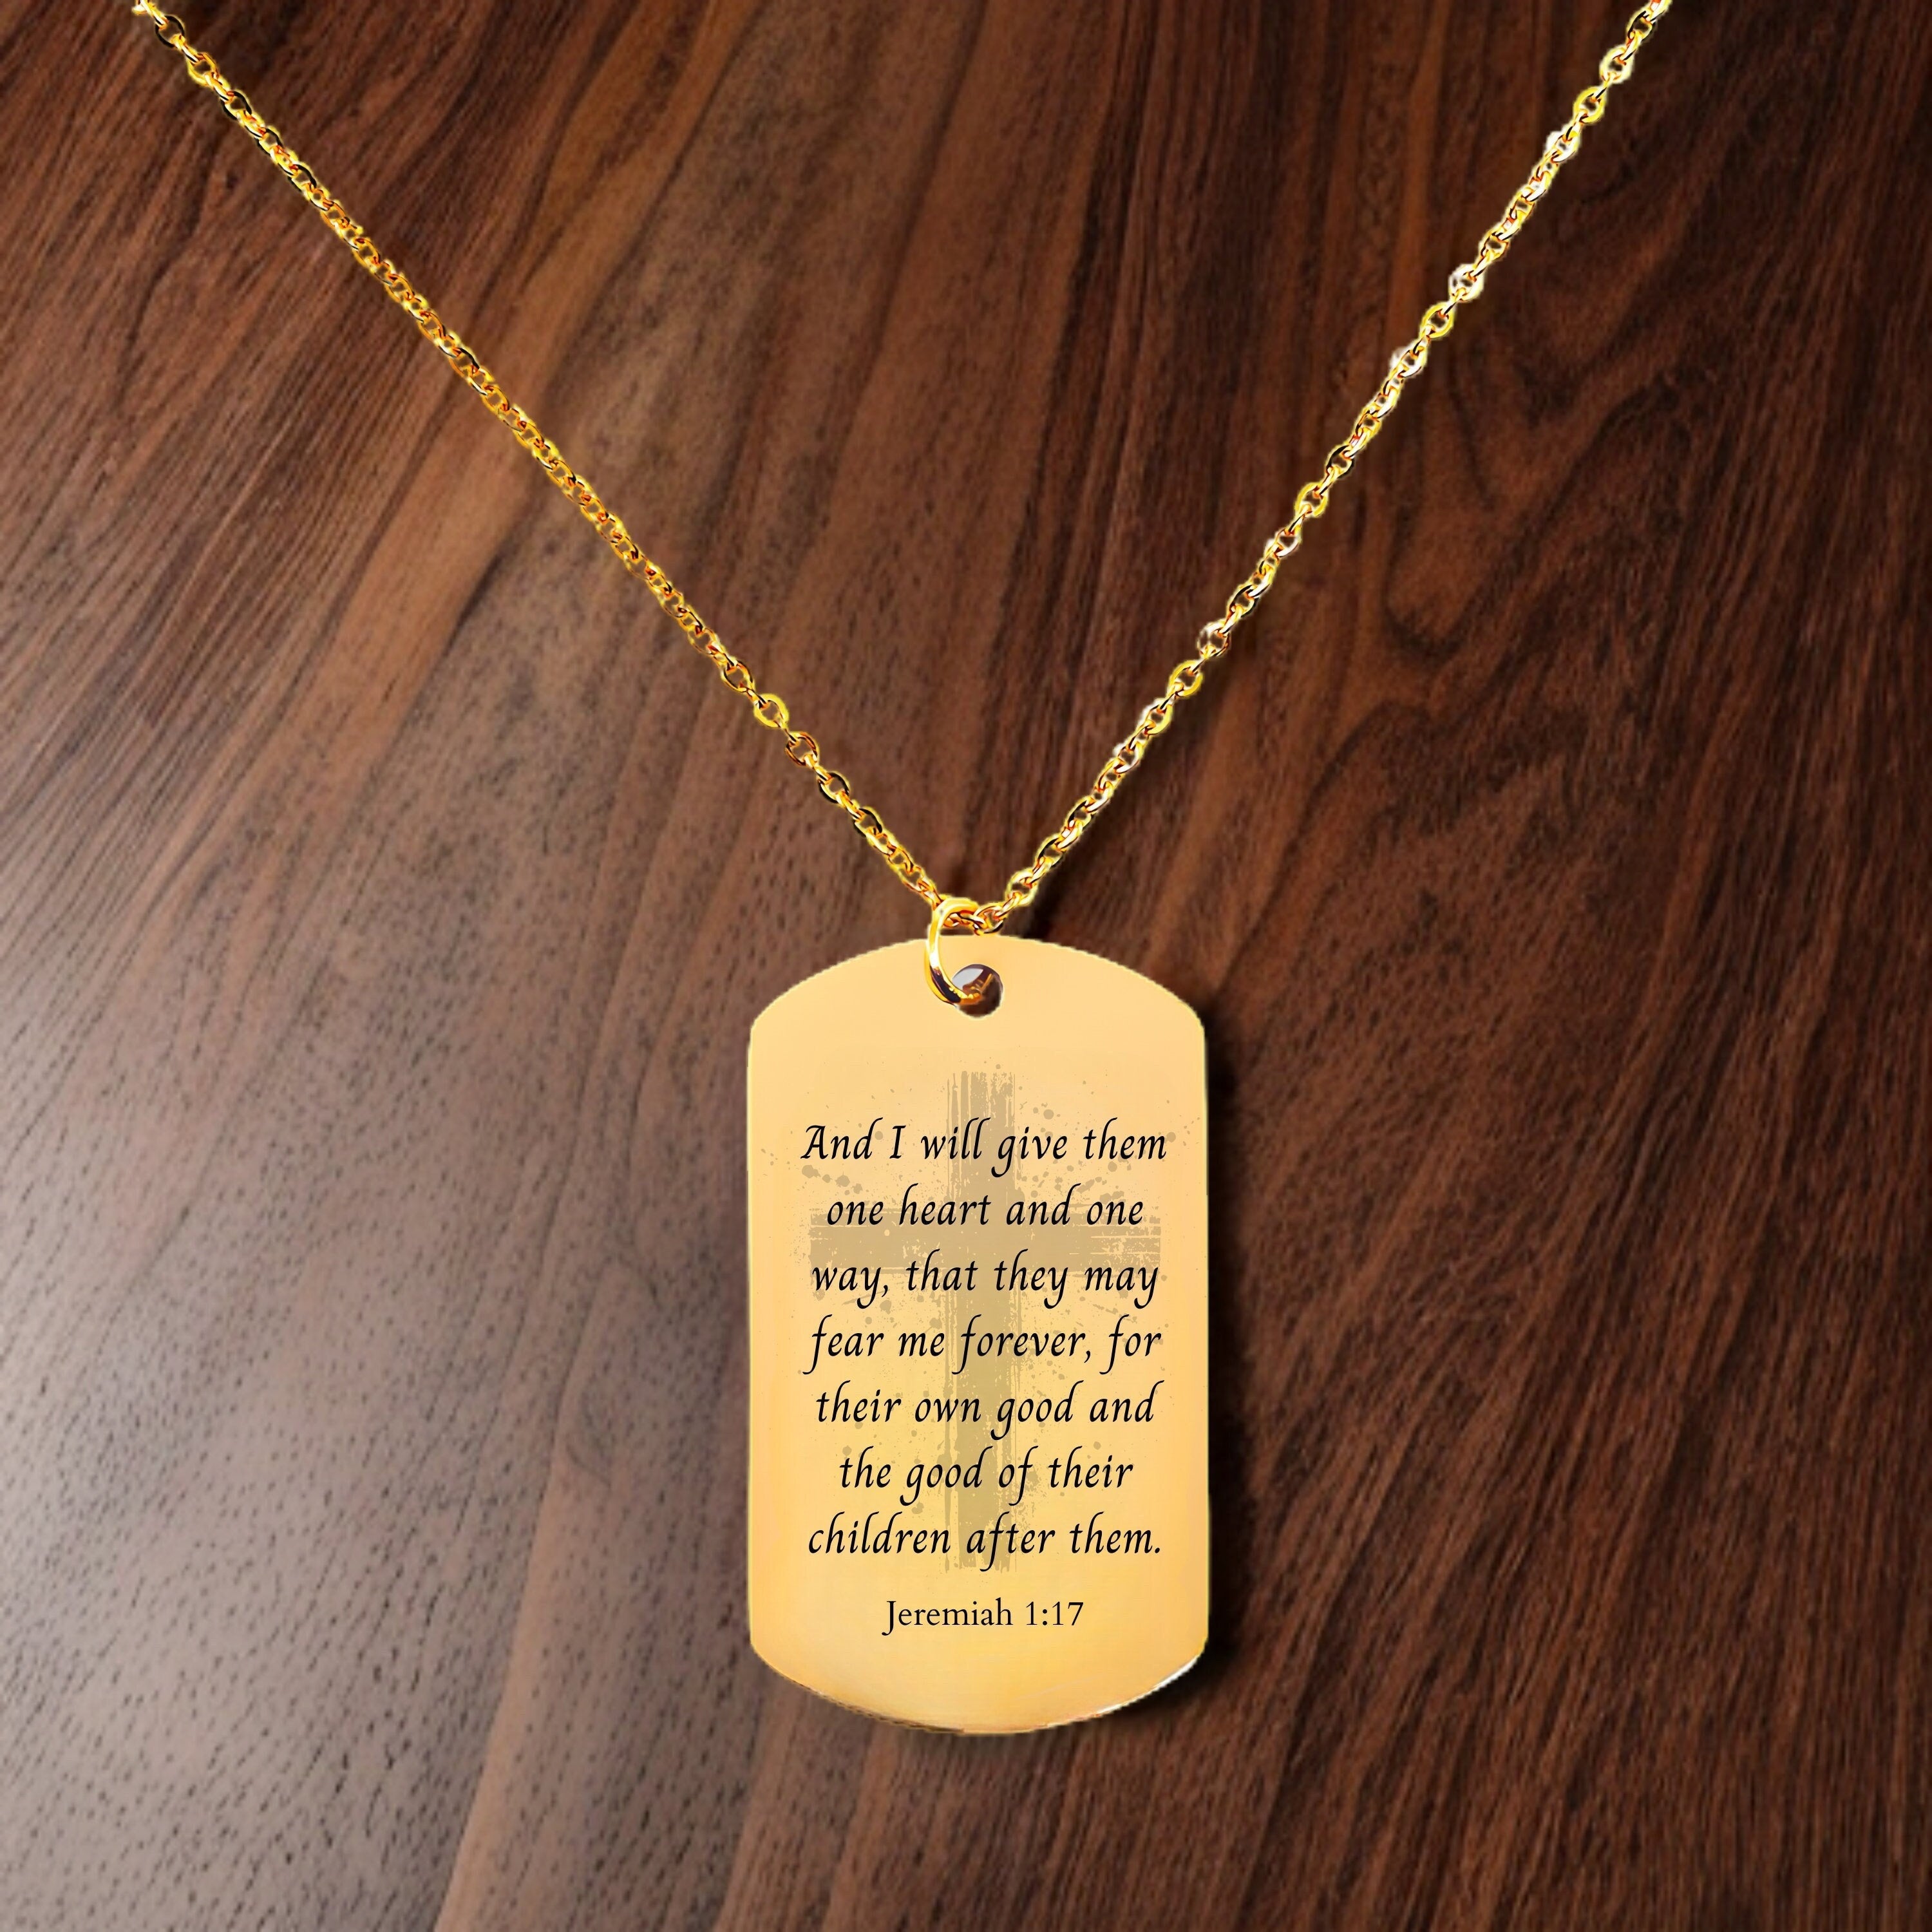 a gold dog tag with a bible verse on it